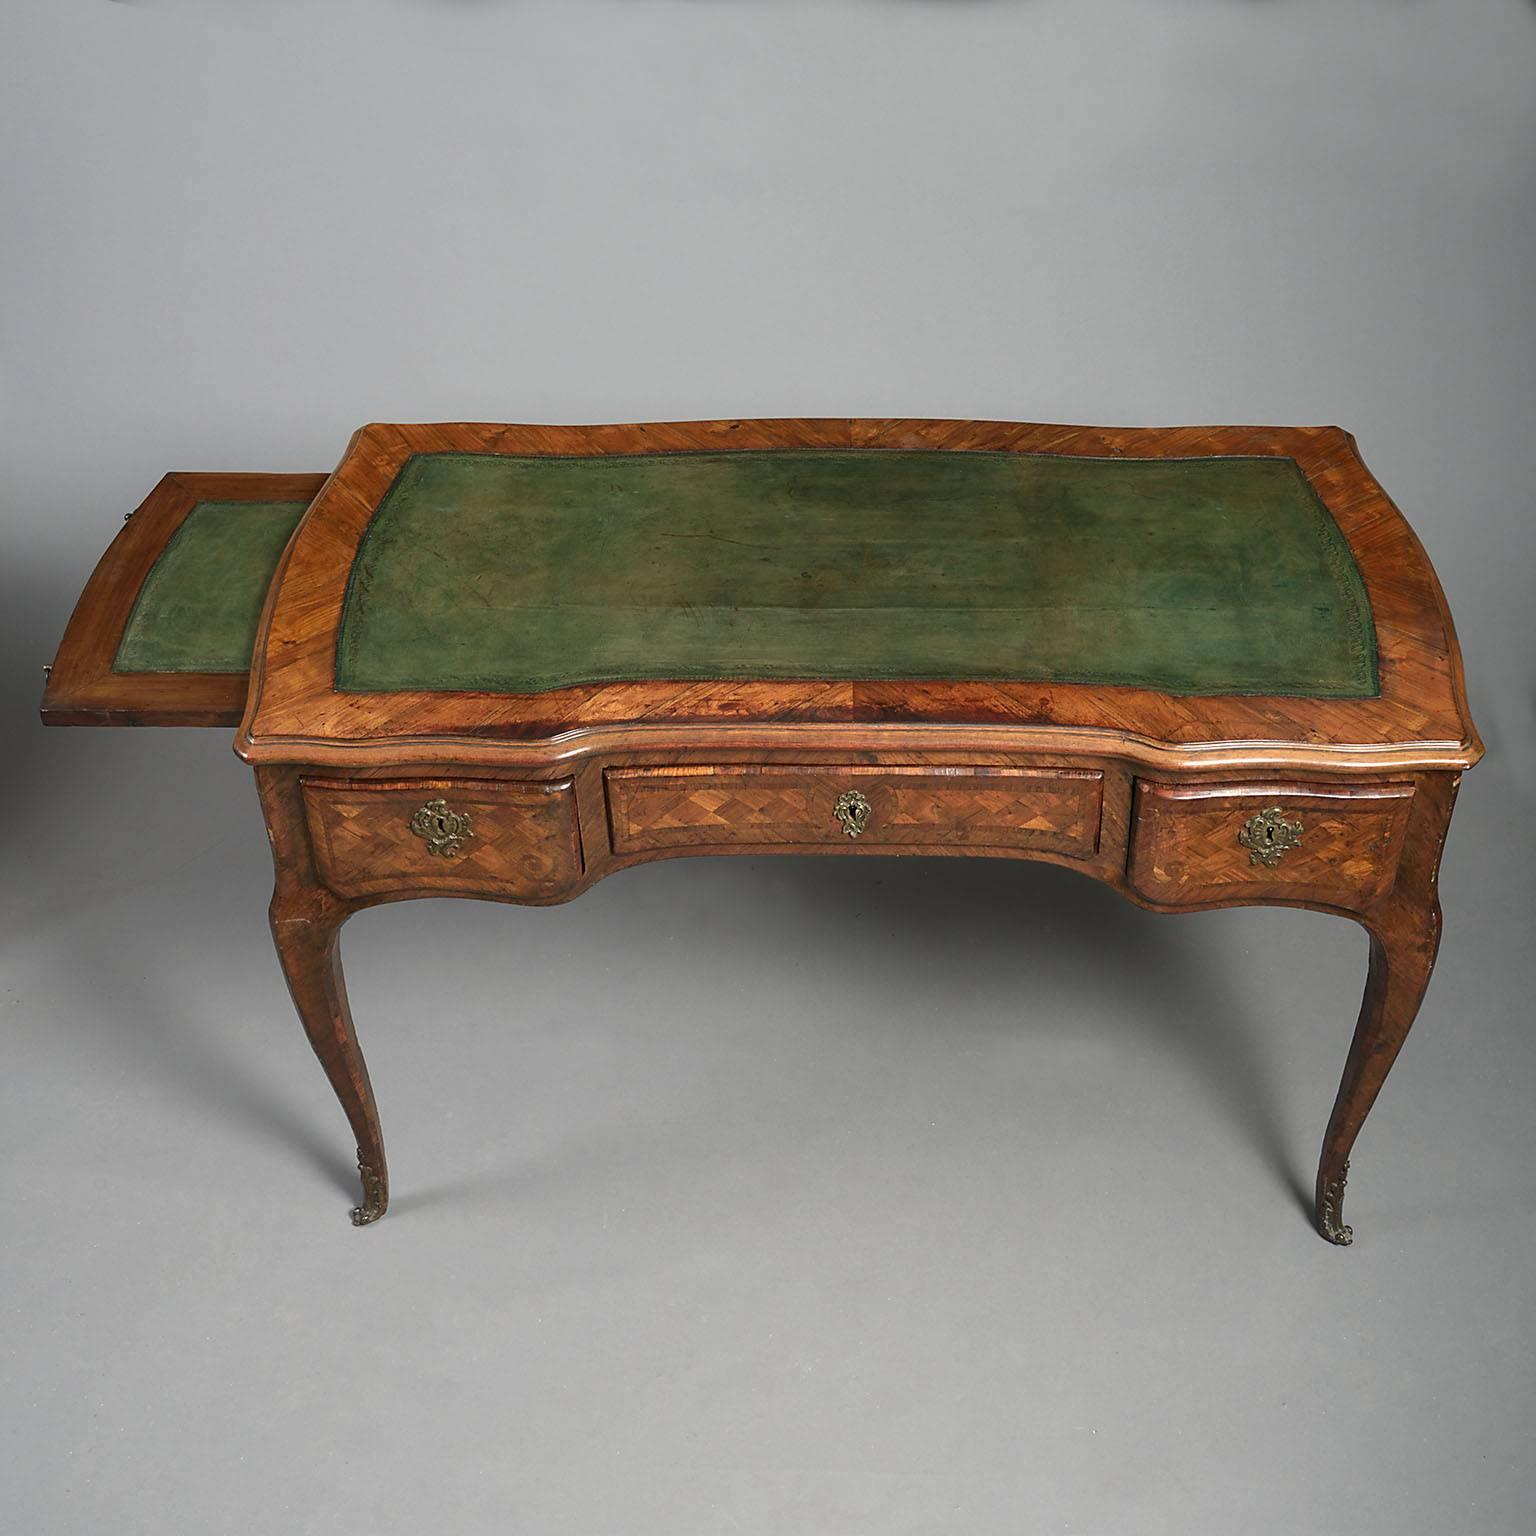 18th Century Kingwood and Tulipwood Parquetry Serpentine Bureau-Plat For Sale 1